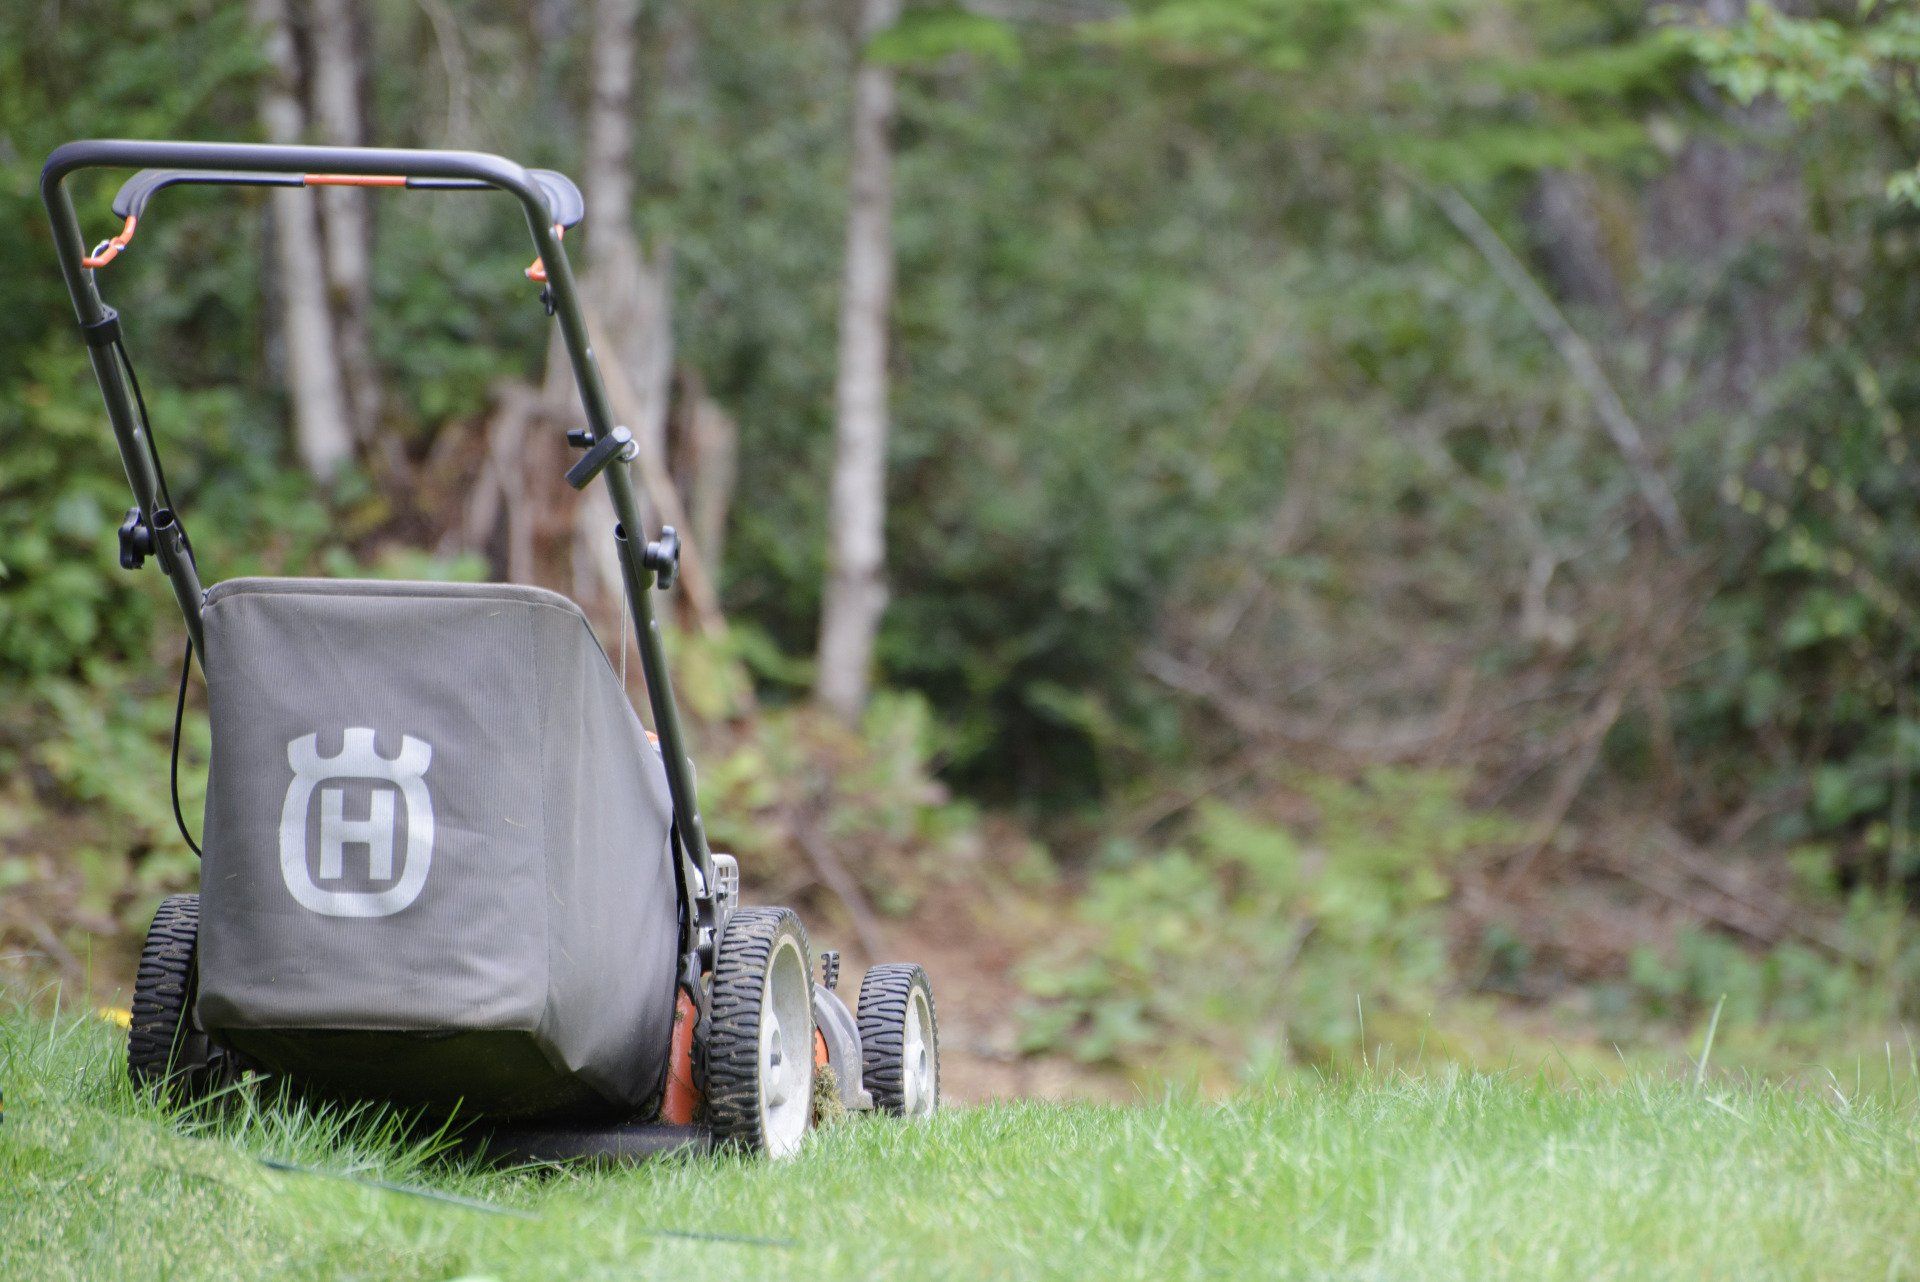 lawn mower with catcher bag